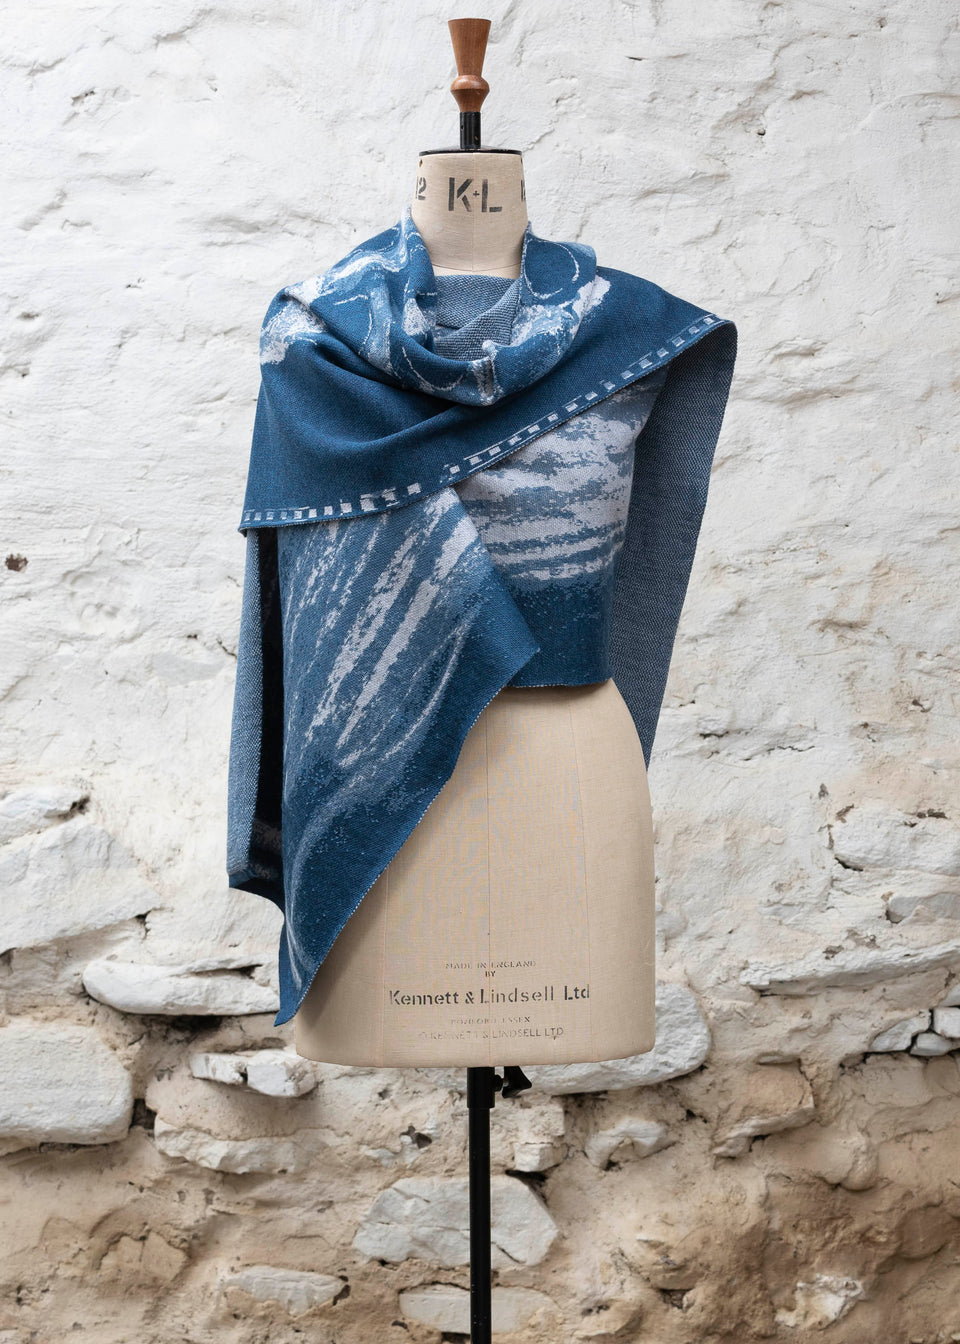 Finely knitted shawl in luxurious merino, made in Scotland. Shown on a vintage mannequin against a whitewashed wall. Abstract design in sea blues with curvilinear motifs. Wrapped around for a shorter style with a pin and shown from front